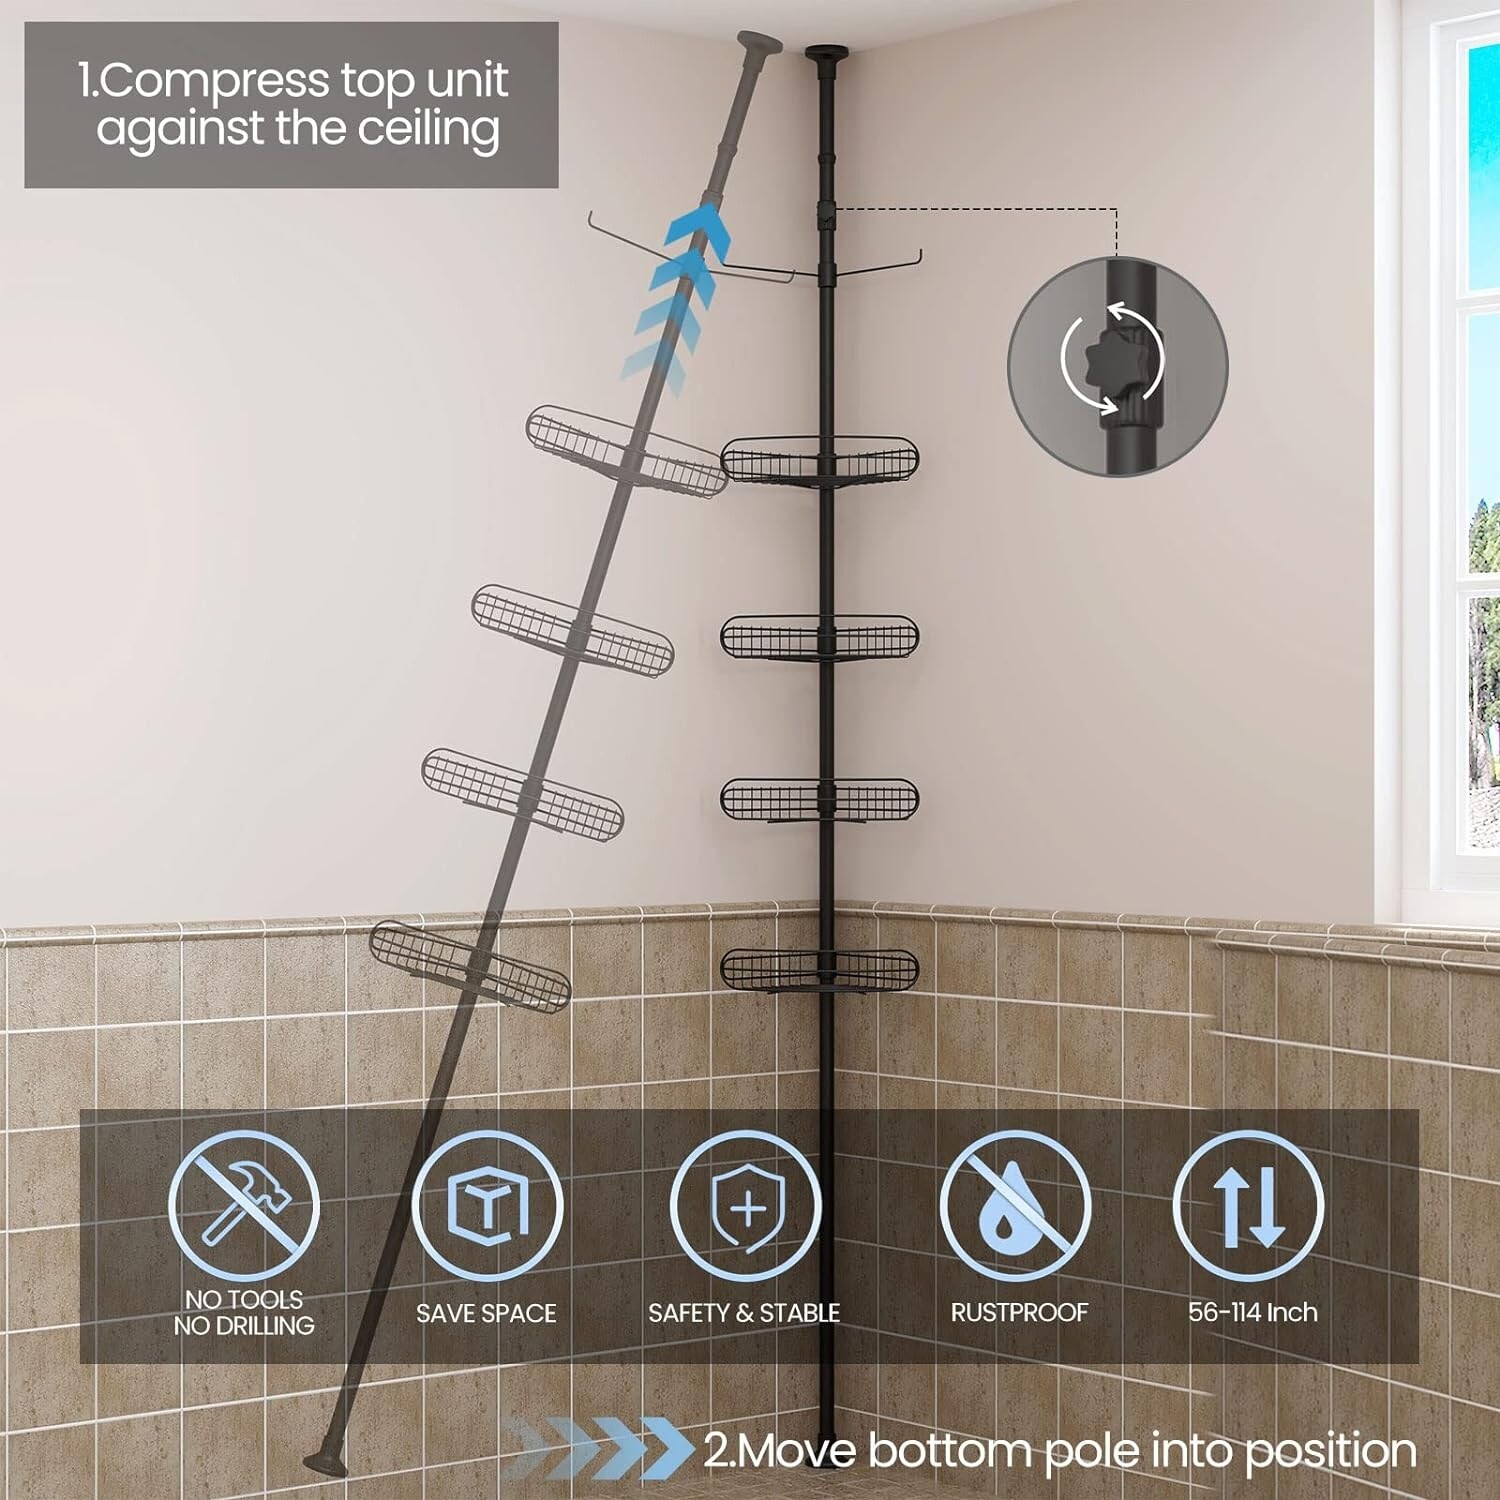 https://ak1.ostkcdn.com/images/products/is/images/direct/3b22699690c262b6605aa9a5ce50e38aa93d4d4a/4-Tier-Shower-Caddy-No-Drilling-Corner-Organizer-Shelves%2C-56-114-Inch.jpg